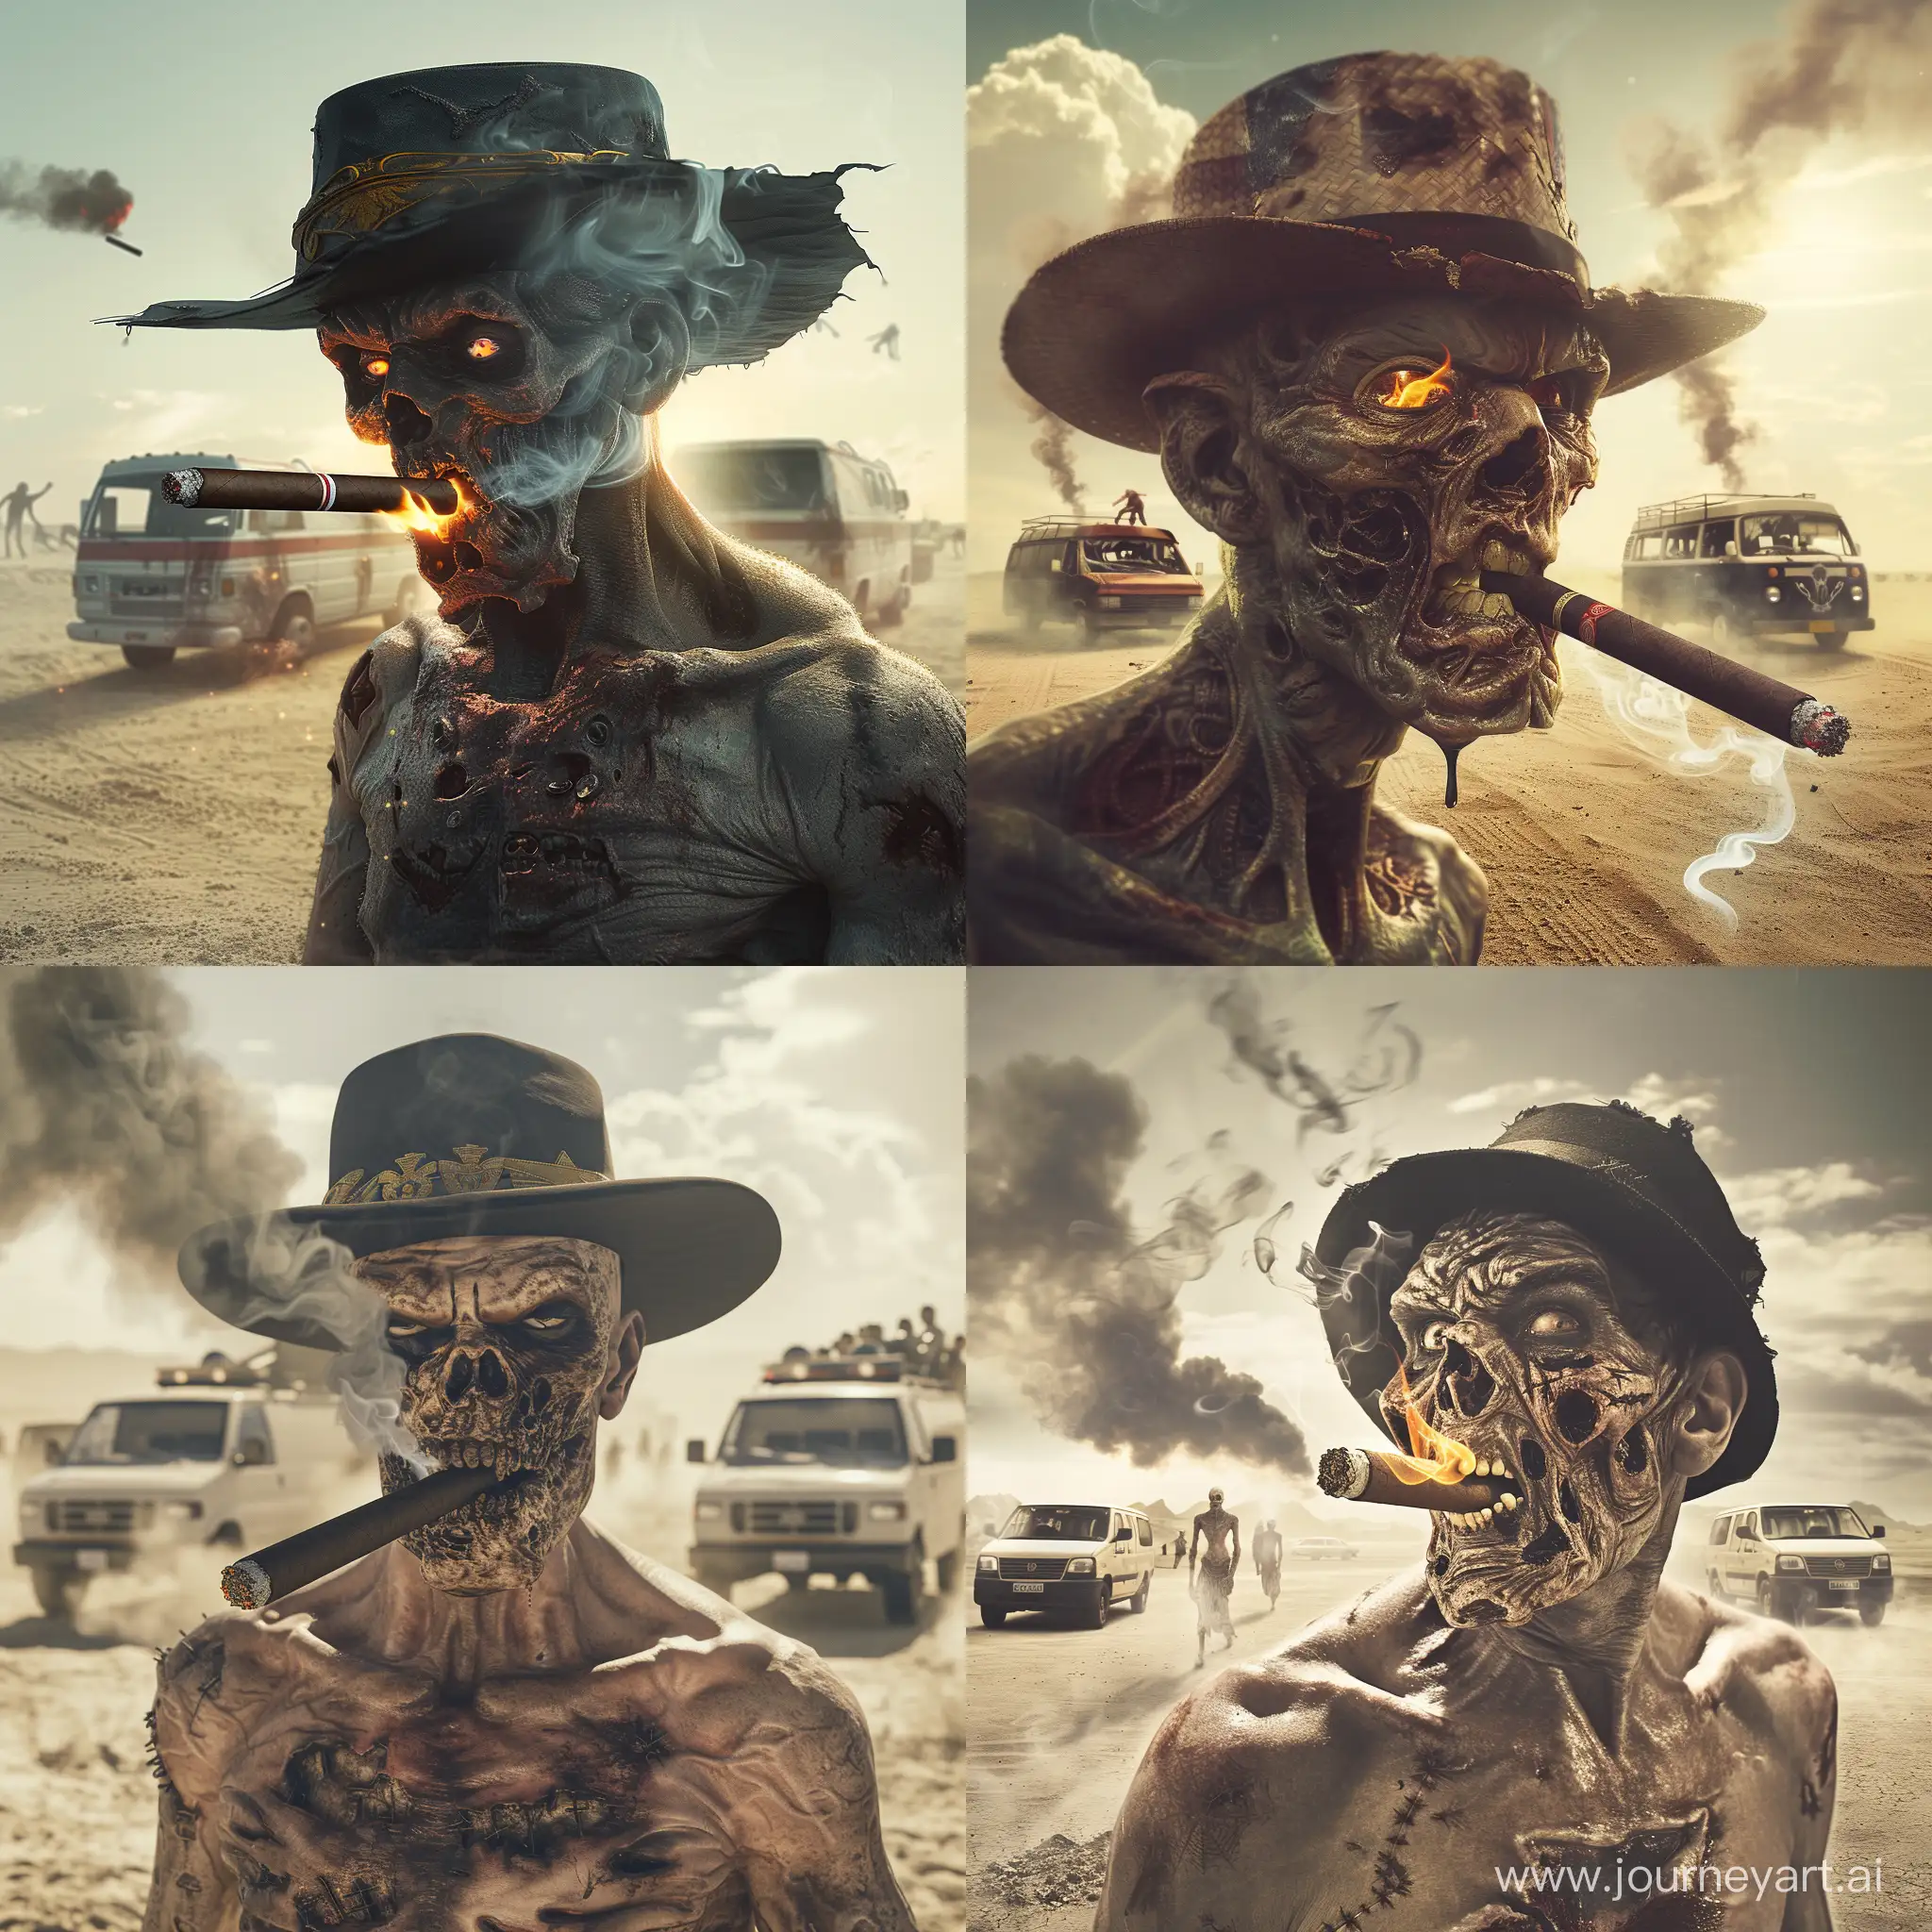 Post-apocalyptic desert, a Zombie with a powerful bulky body, something burning in its mouth – must be a zombie Montecristo cigar. He took a drag and emerged into the light, now revealing his scar-covered face, black smoking, and a hilarious Spanish hat. Behind him, two vans with zombie drivers were visible. A shockwave of freezing cold follows the shot. --v 6 --ar 1:1 --no 79105